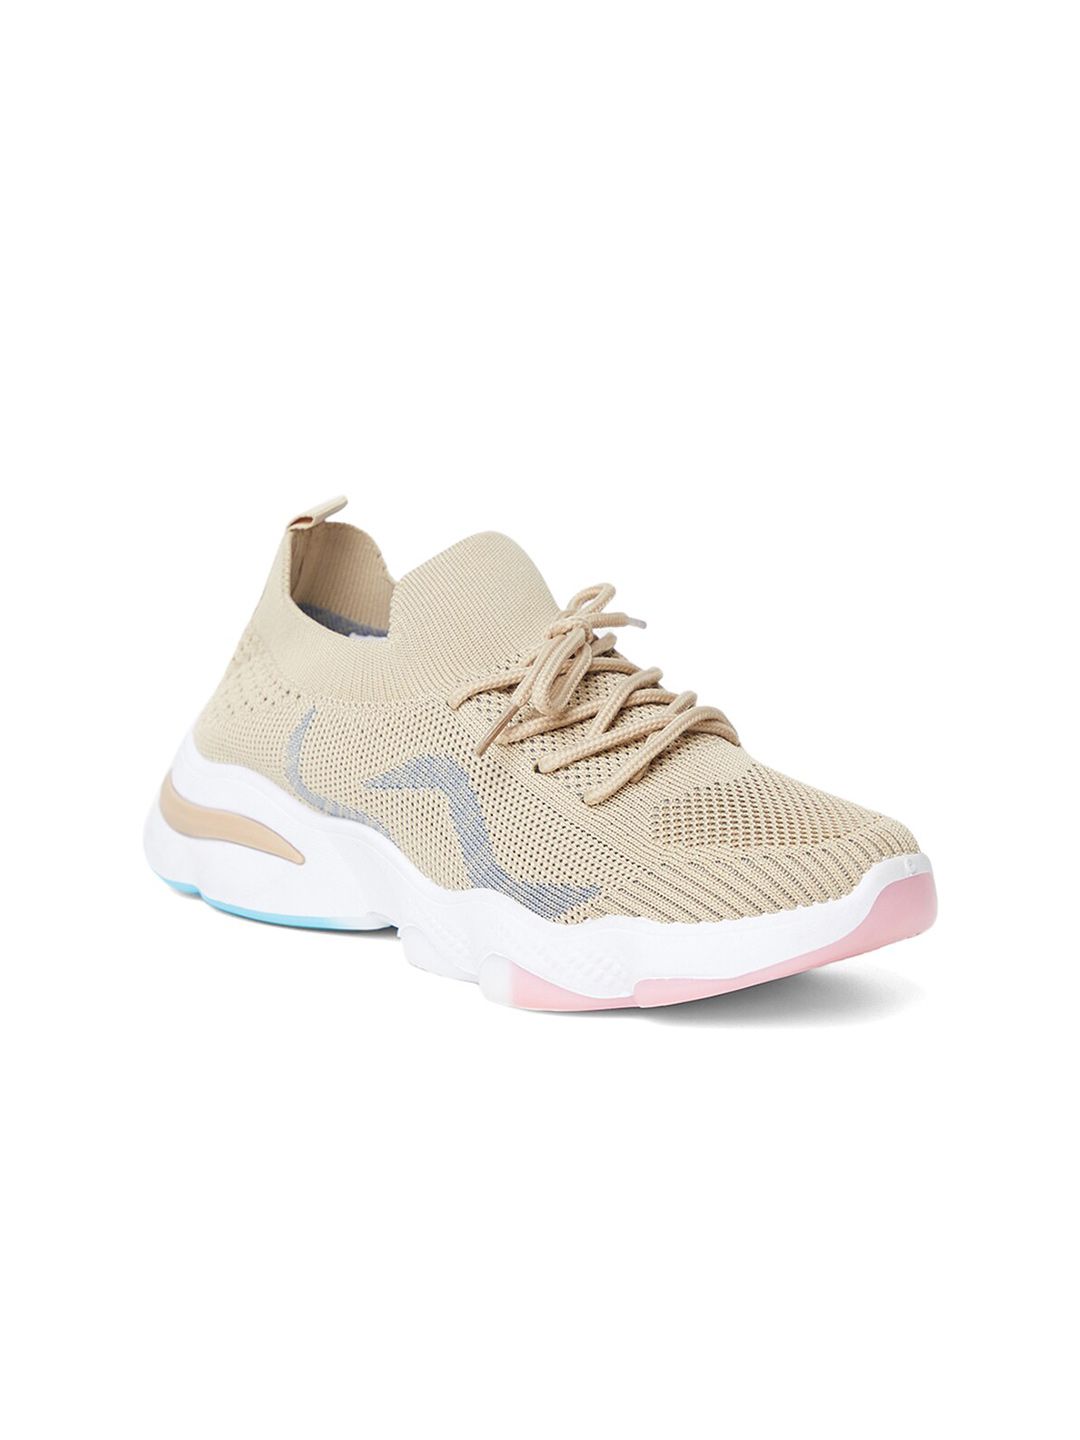 MOZAFIA Women Beige Textile Running Non-Marking Shoes Price in India